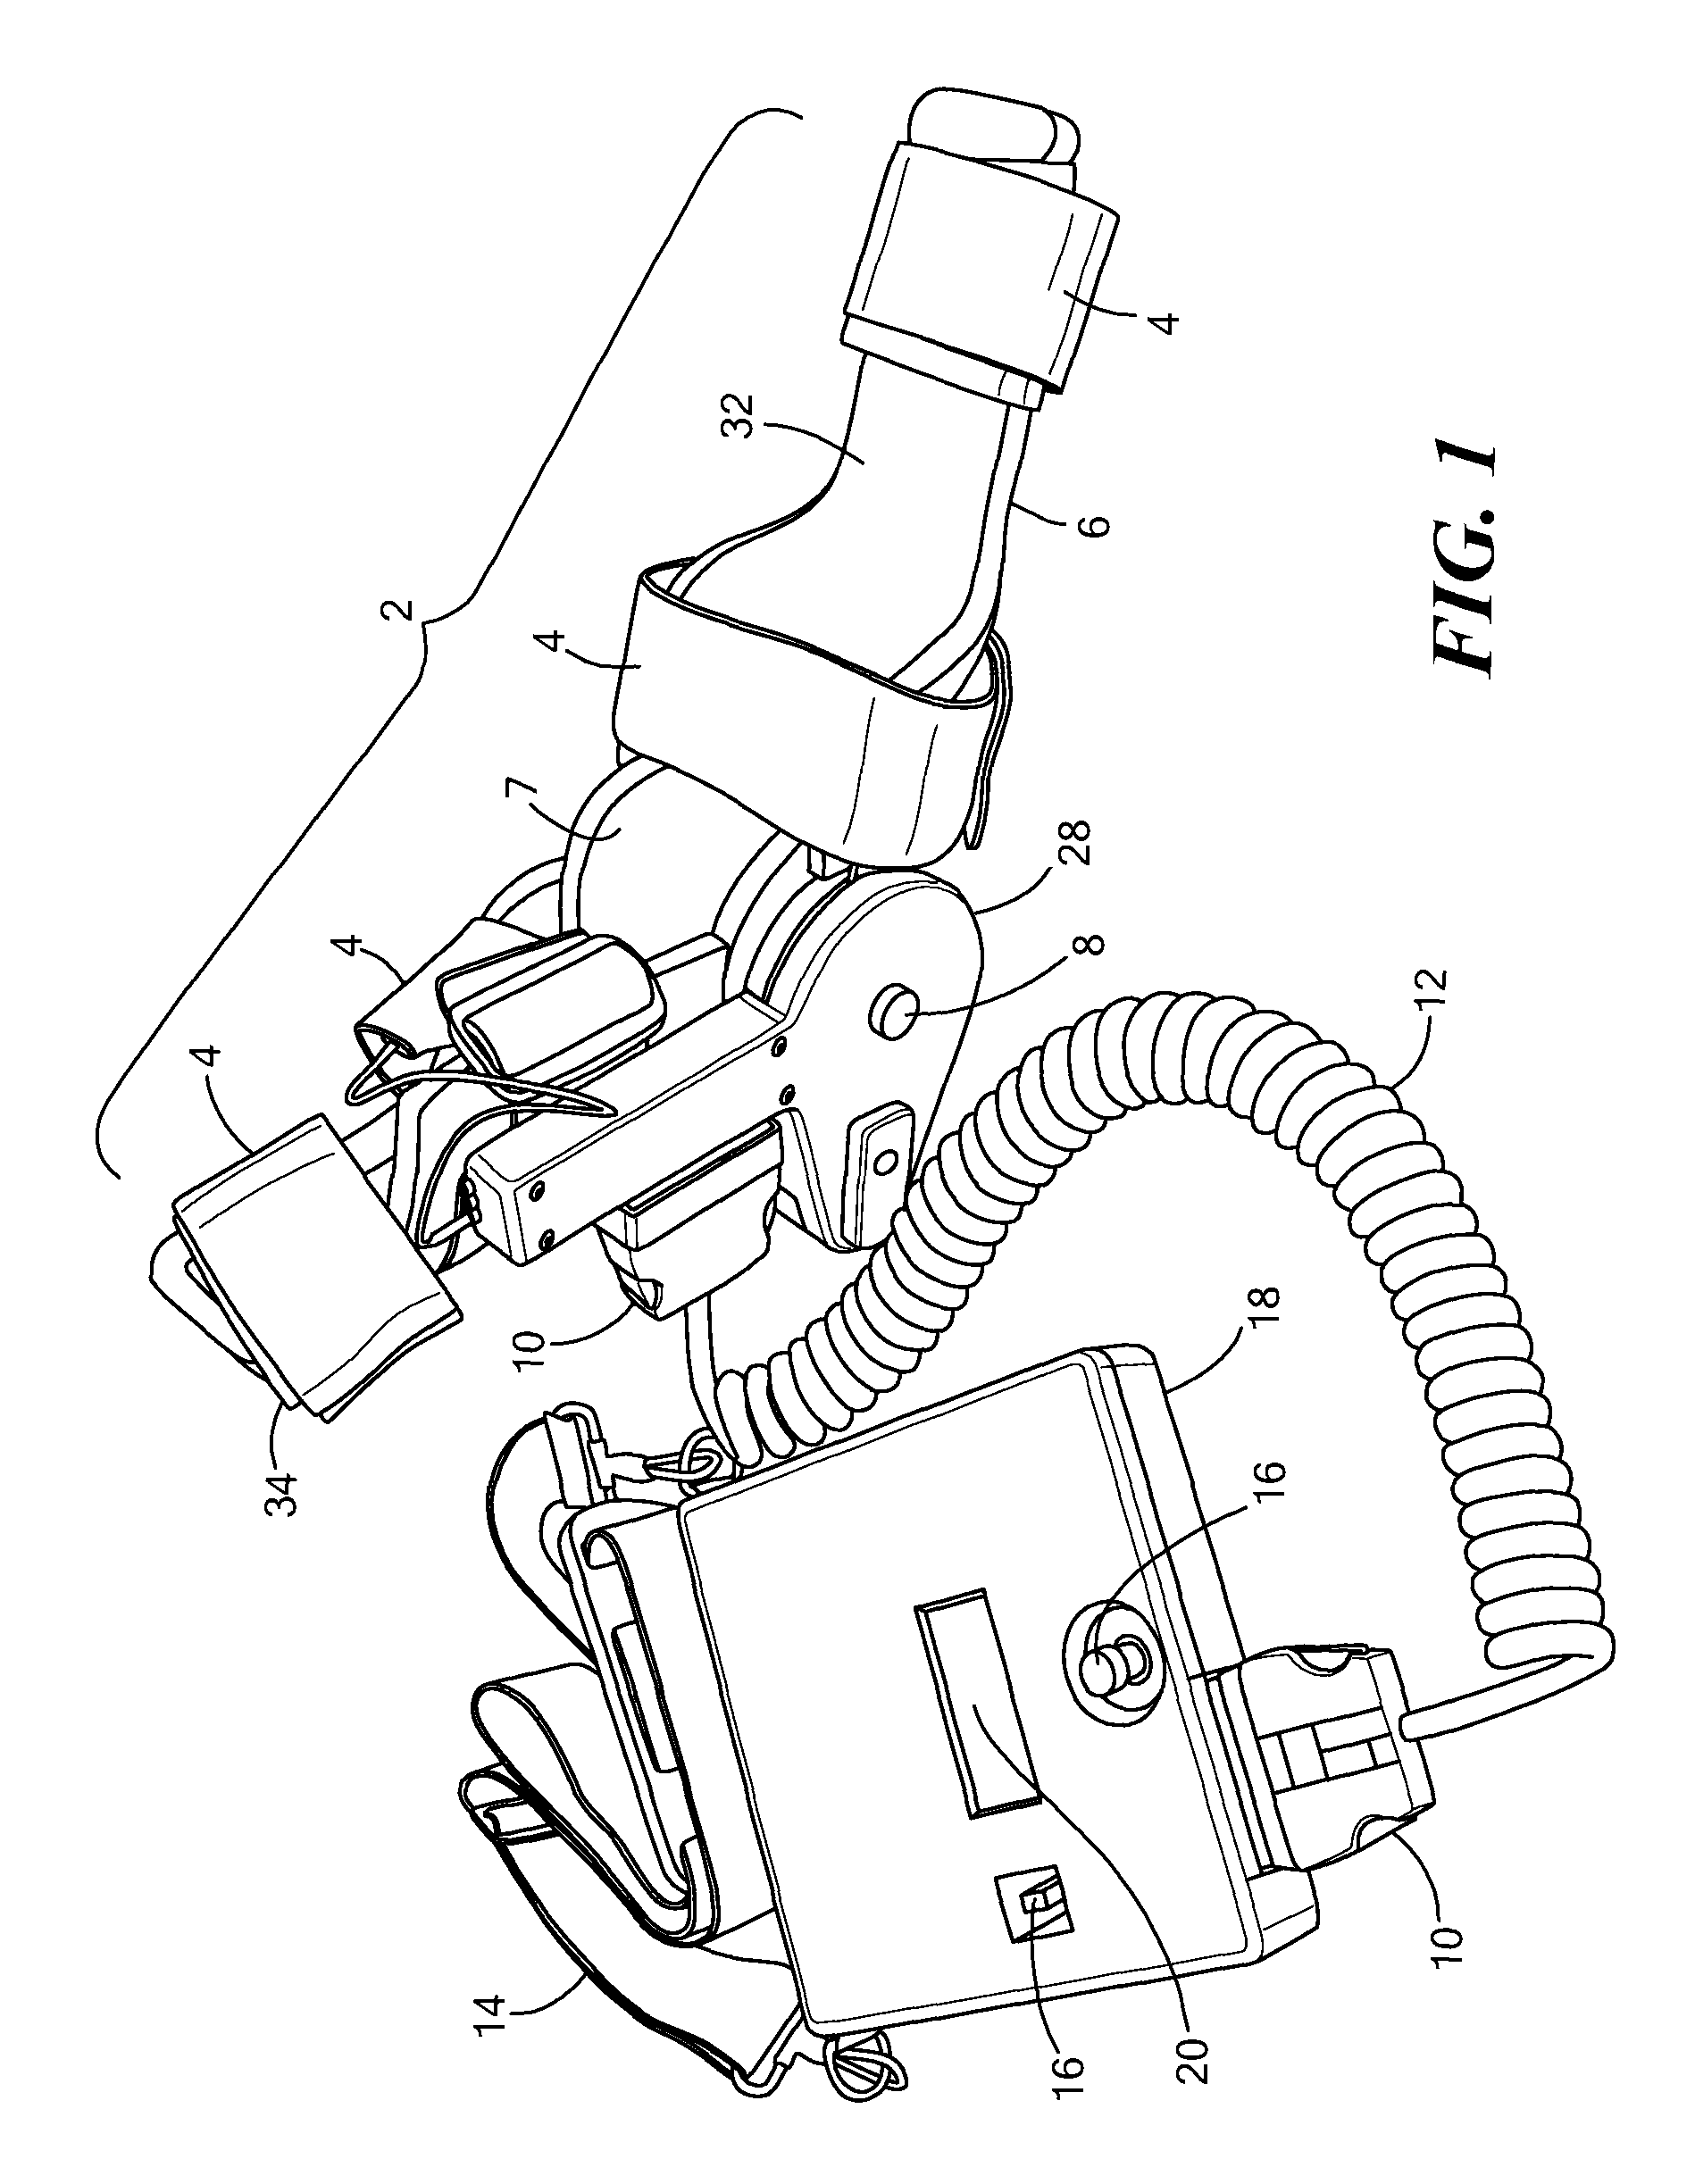 Powered orthotic device and method of using same